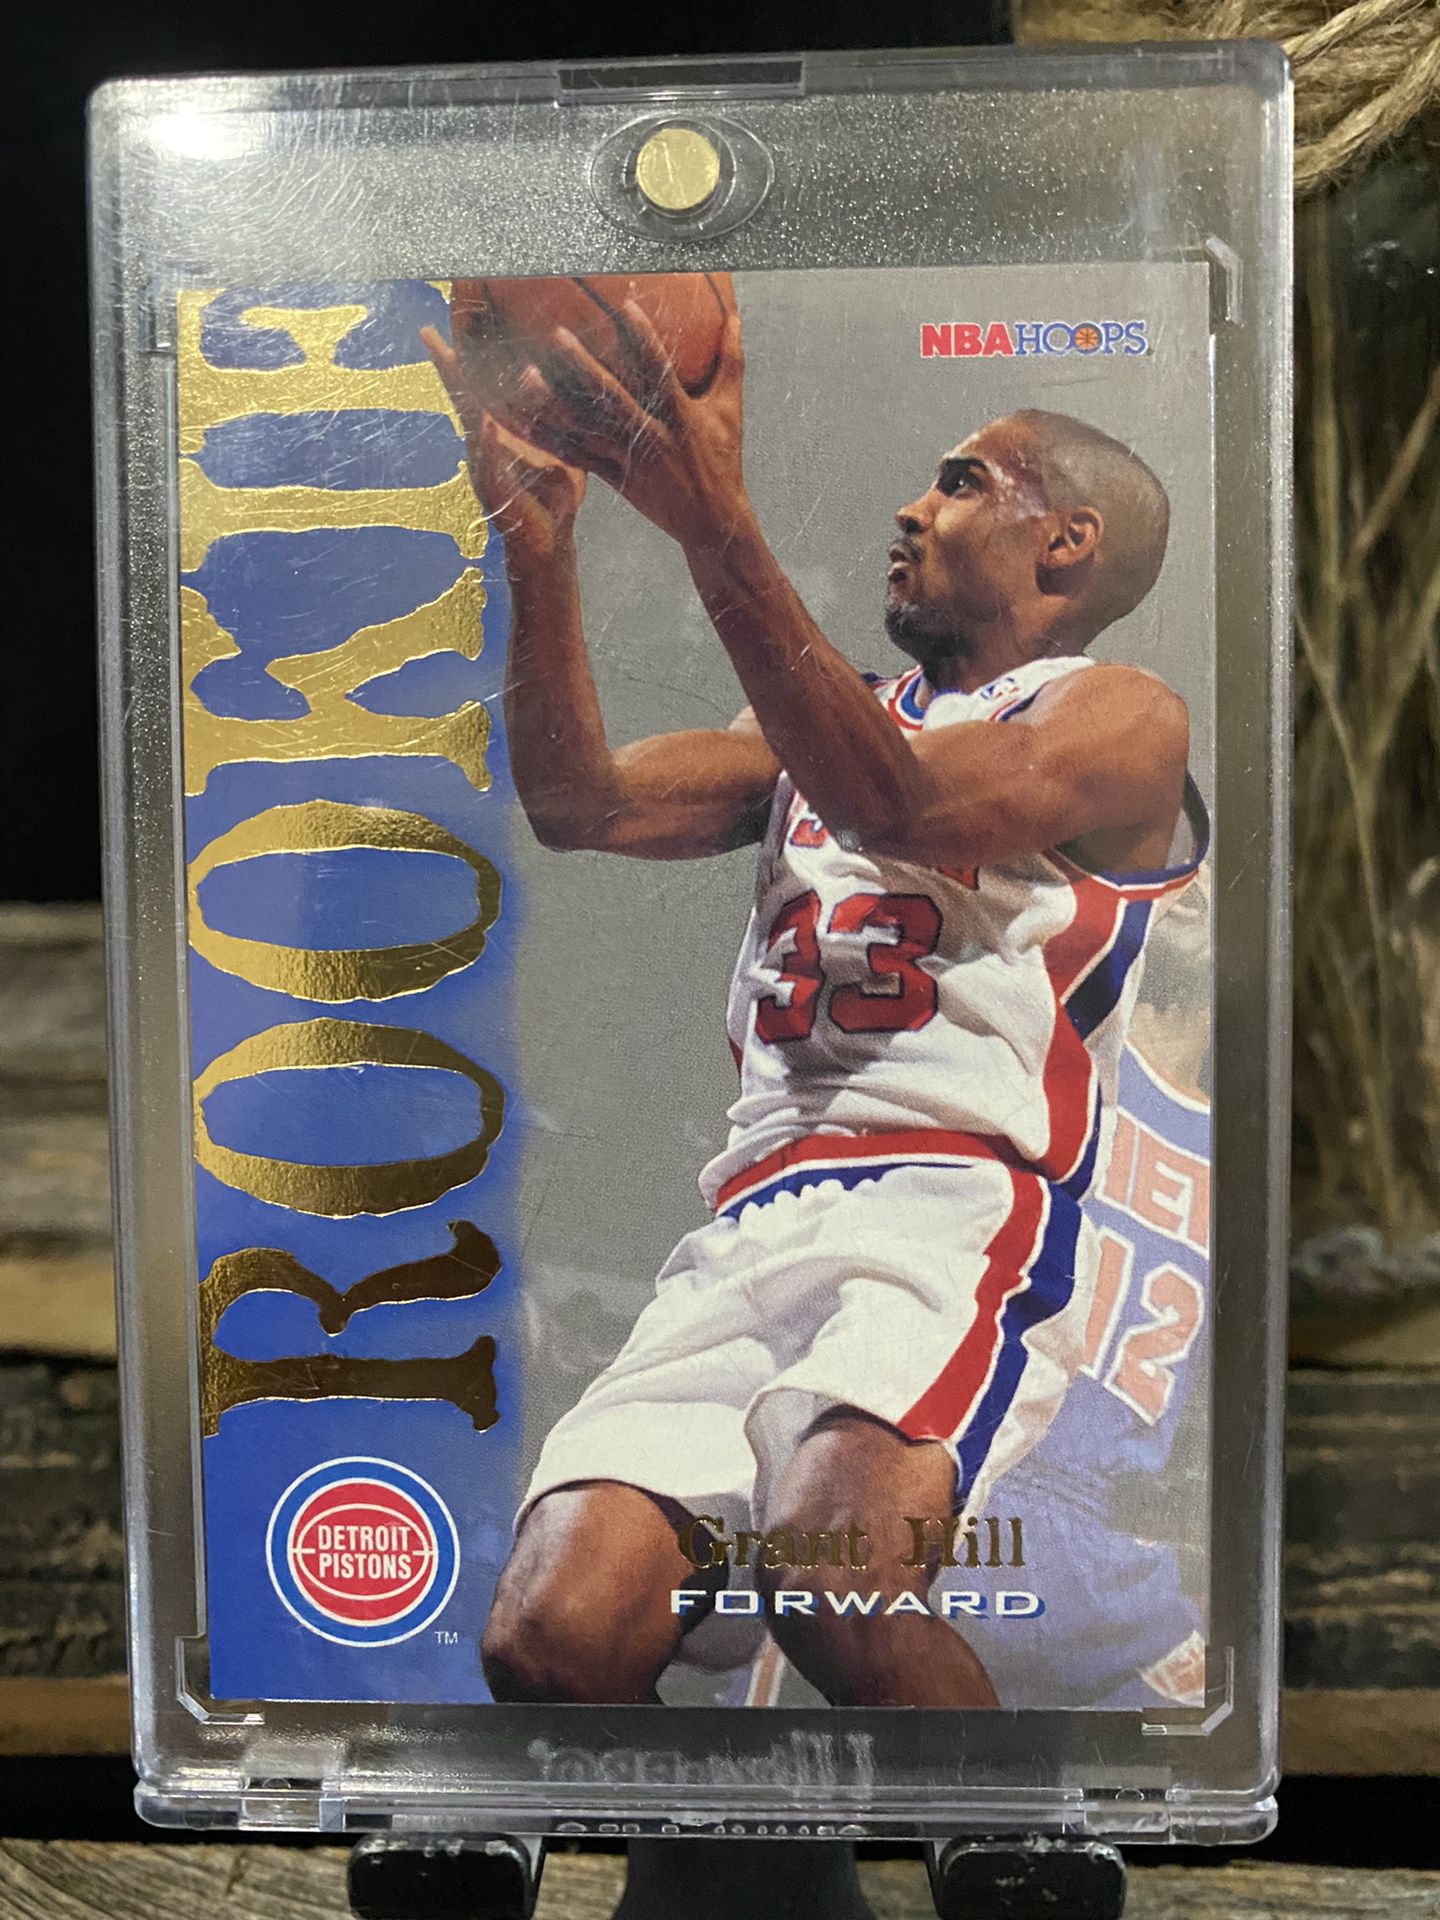 94 SKYBOX Grant Hill Rookie 10 for Sale in Norwalk, CA - OfferUp